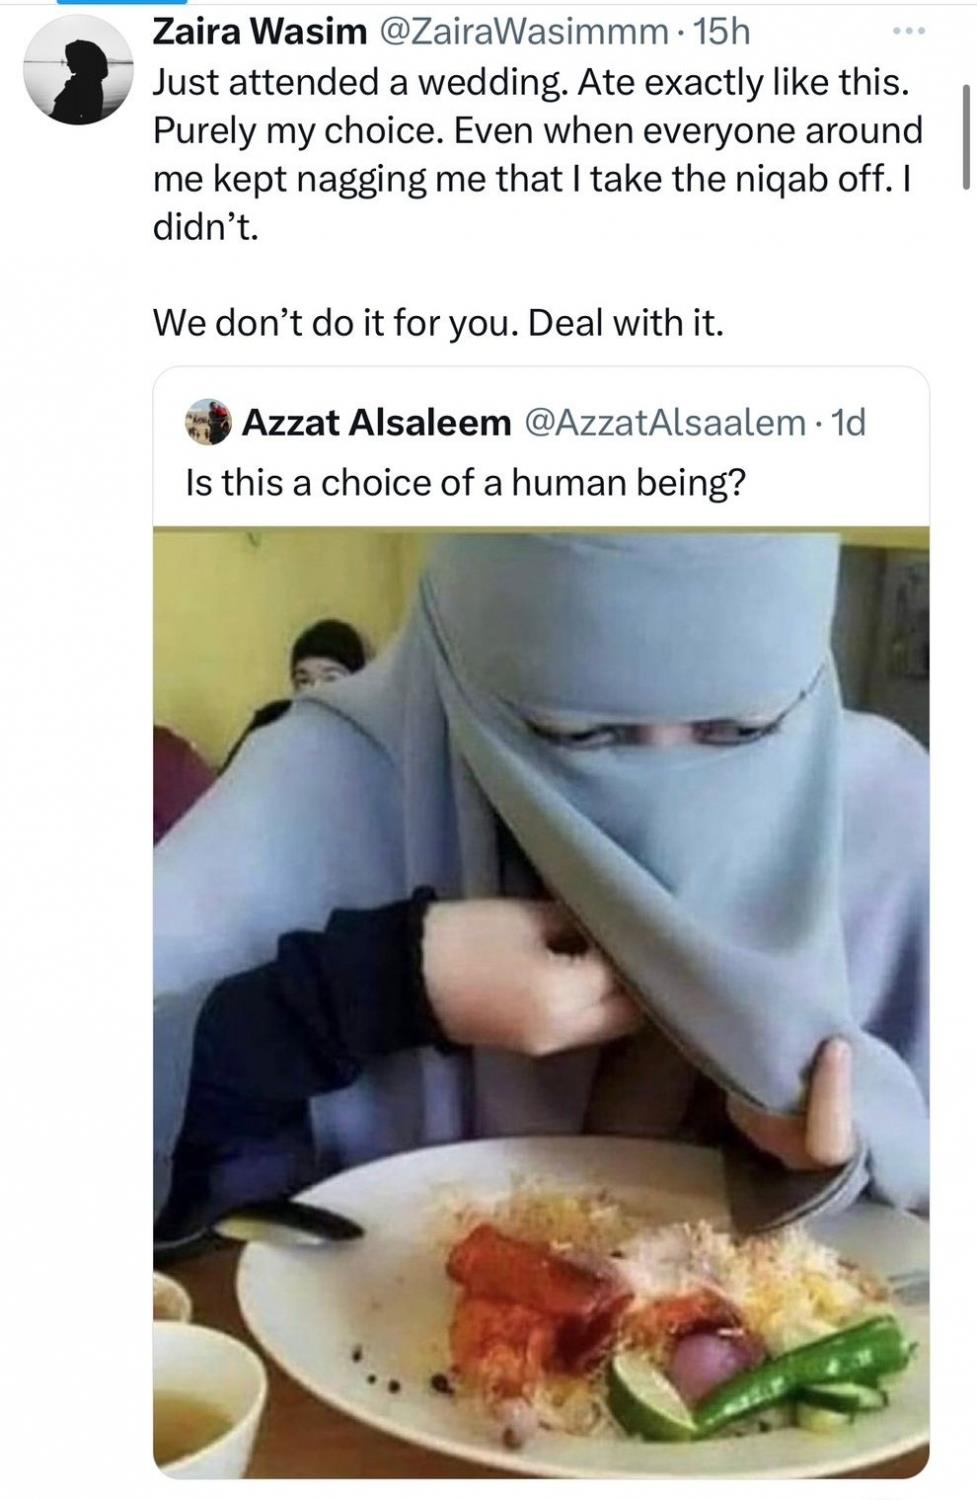  'Purely My Choice': Zaira Wasim Speaks For Woman Eating In A Niqab 